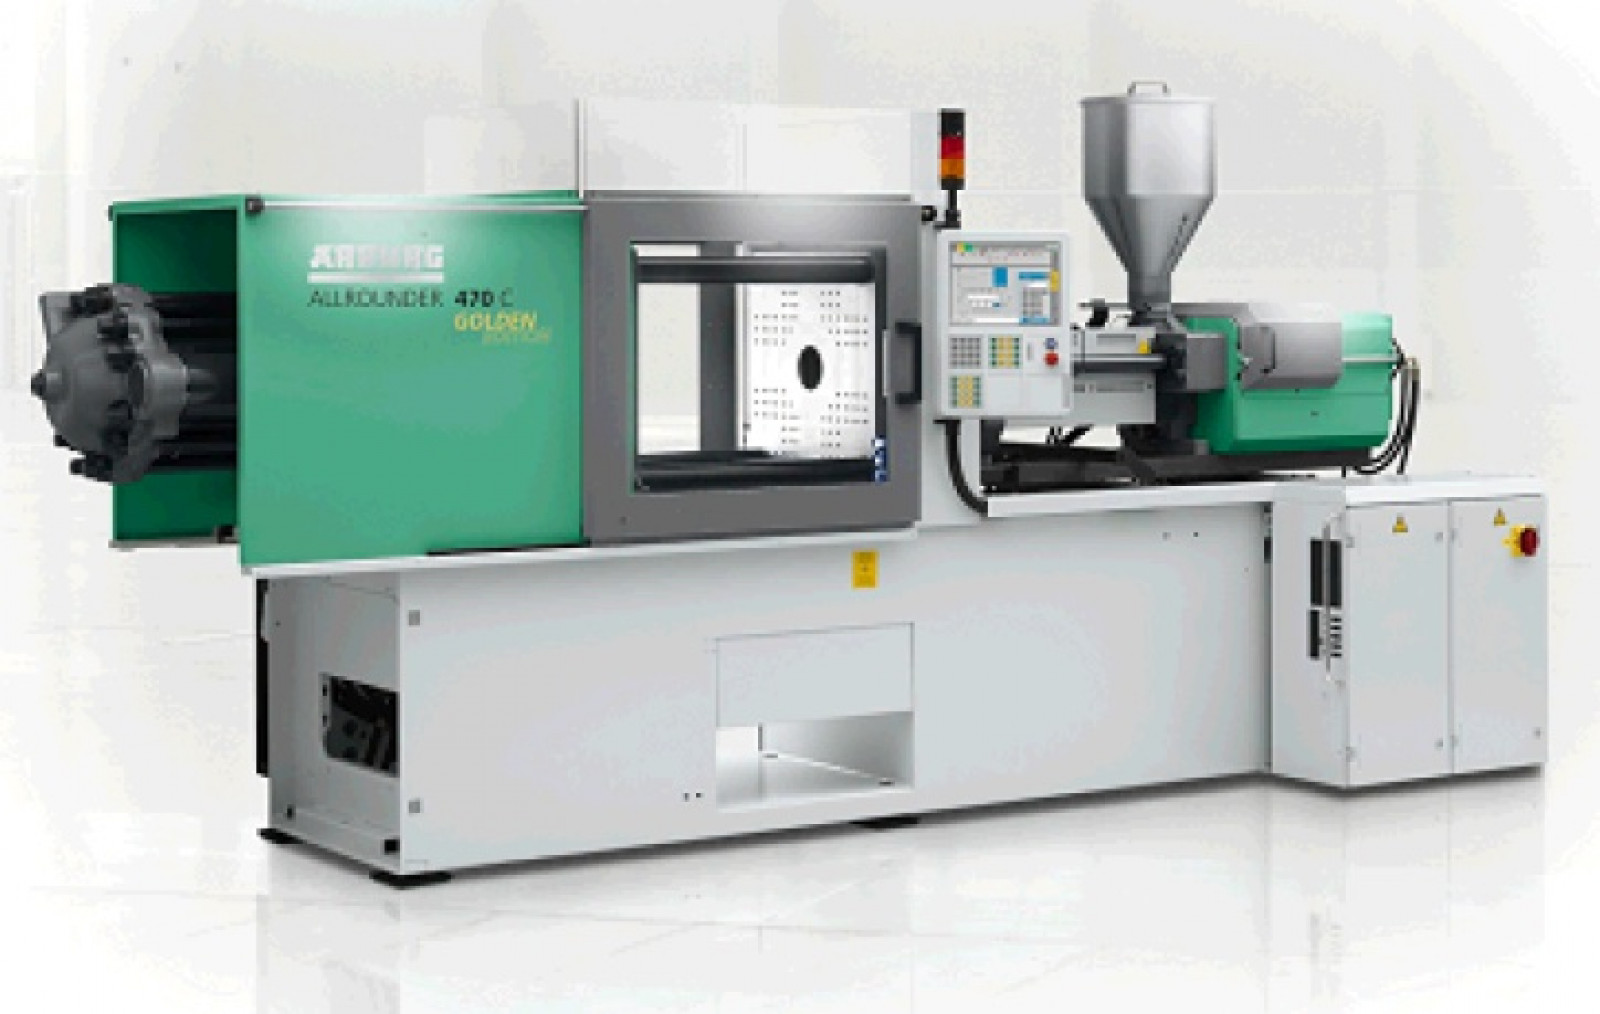 Moulder expands with three new machines